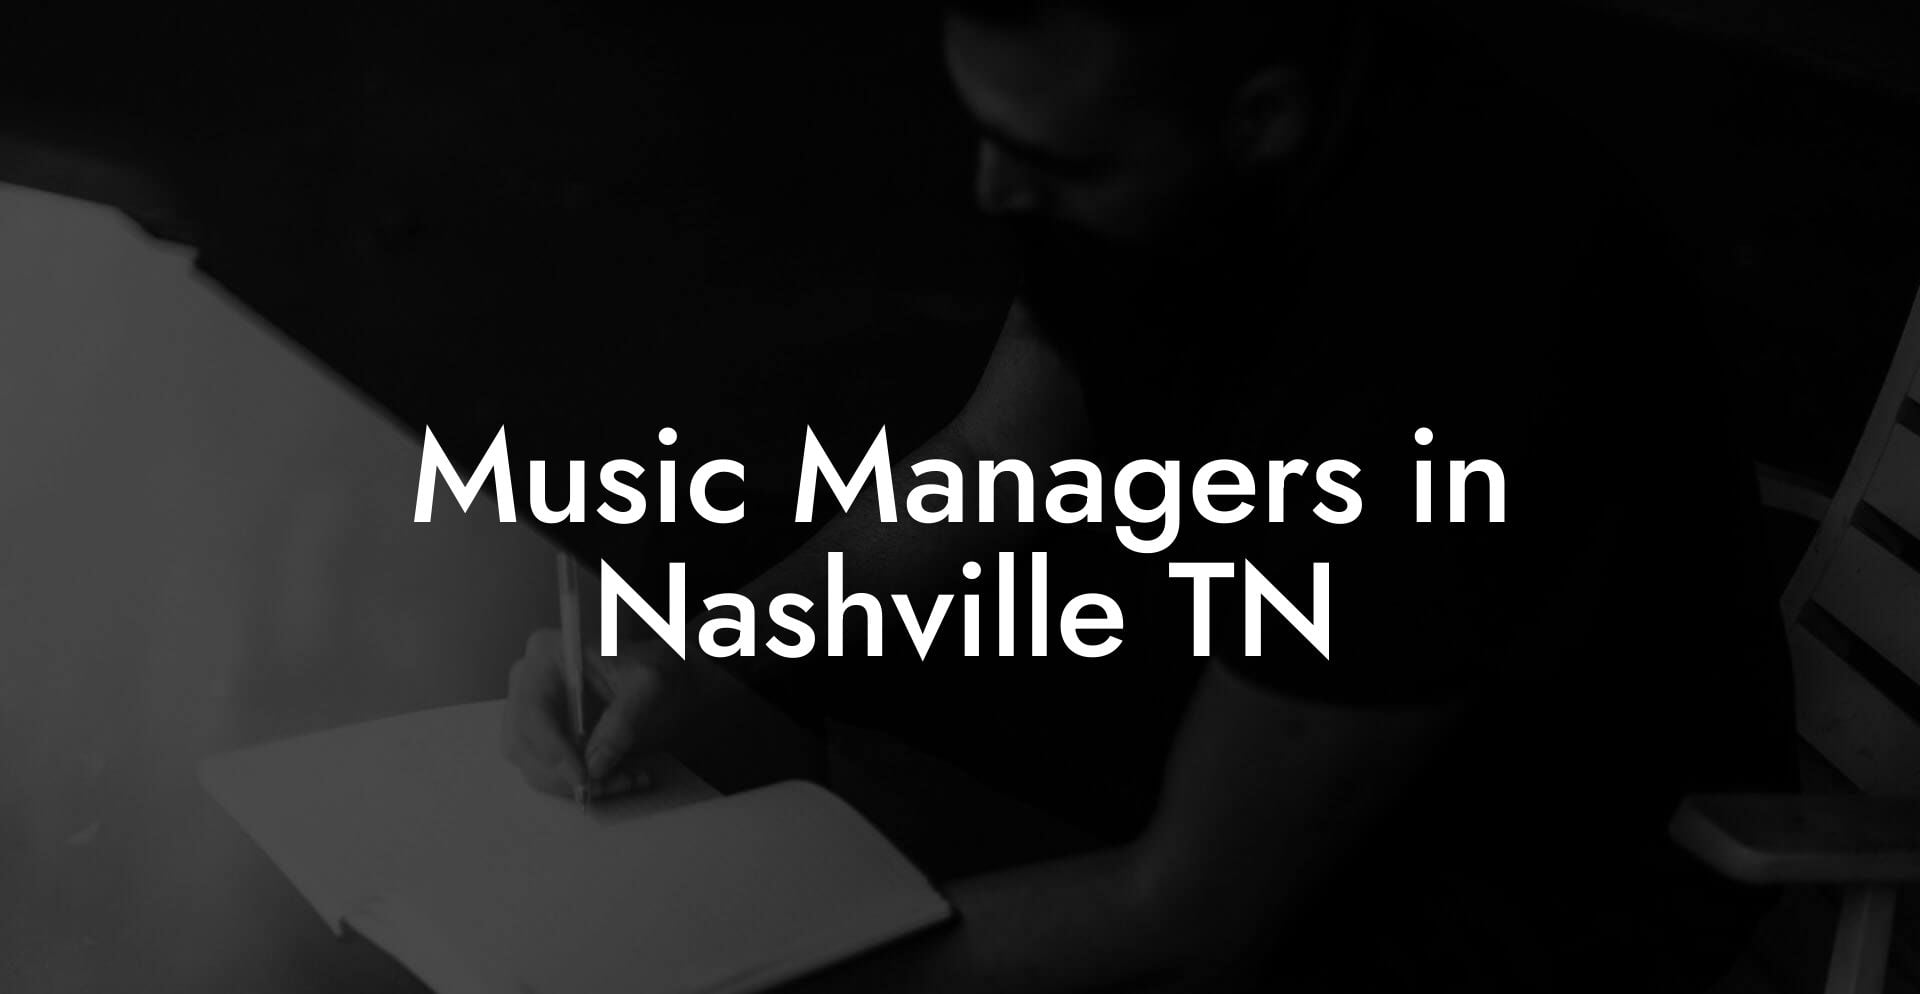 Music Managers in Nashville TN